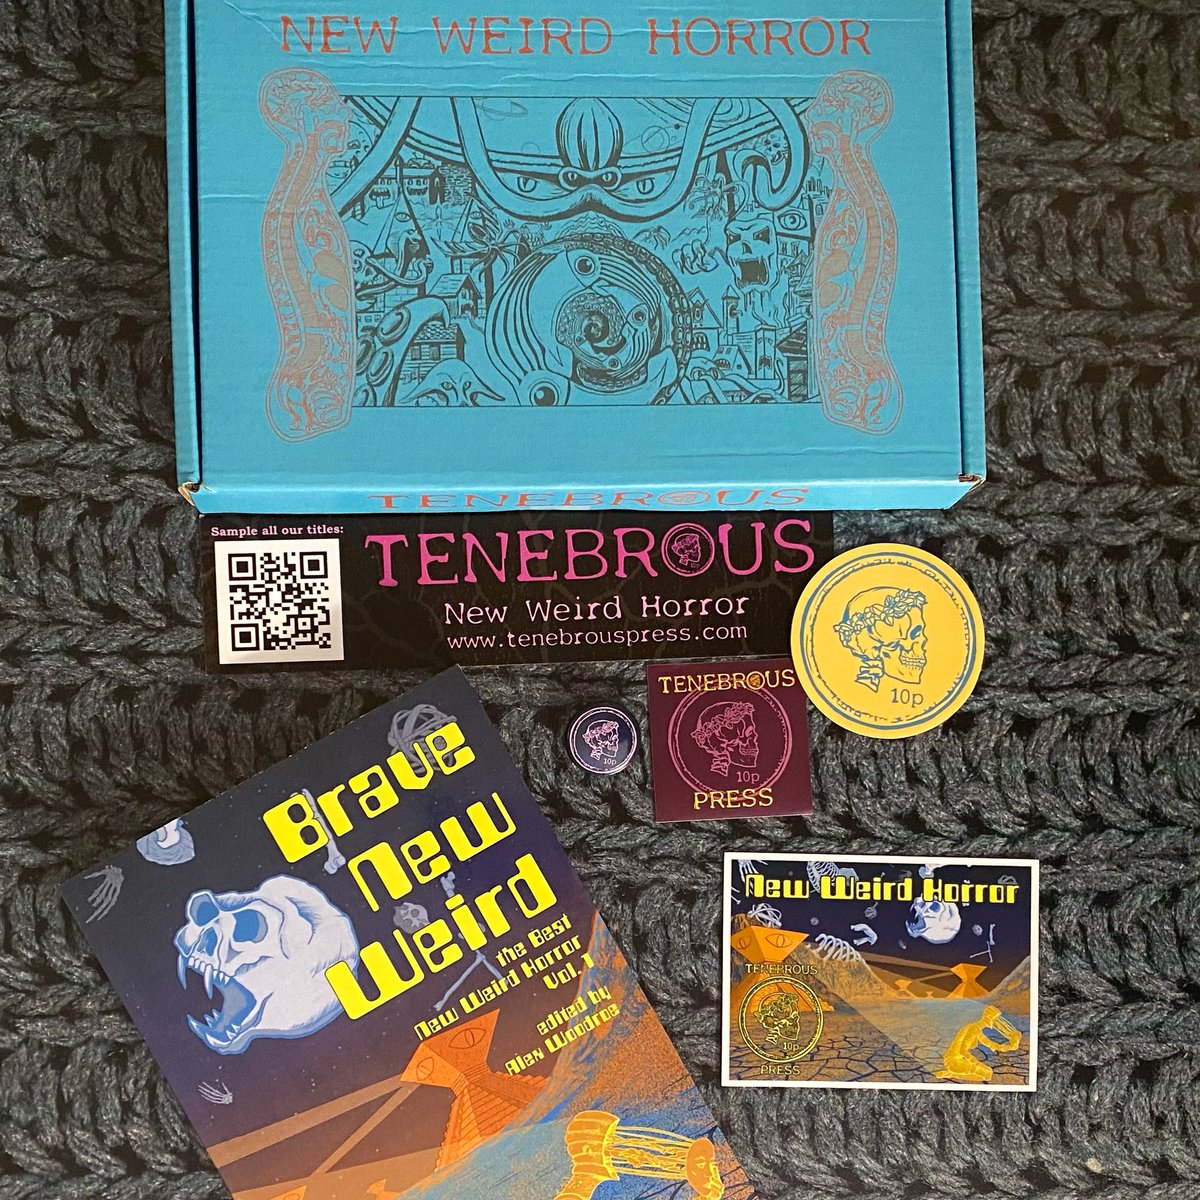 #BOOKMAIL! @tenebrouspress puts together a truly fun package to receive. I can’t wait to dive into these New Weird stories…right after I find a place for all my cool stickers.
#newweird #bookswag